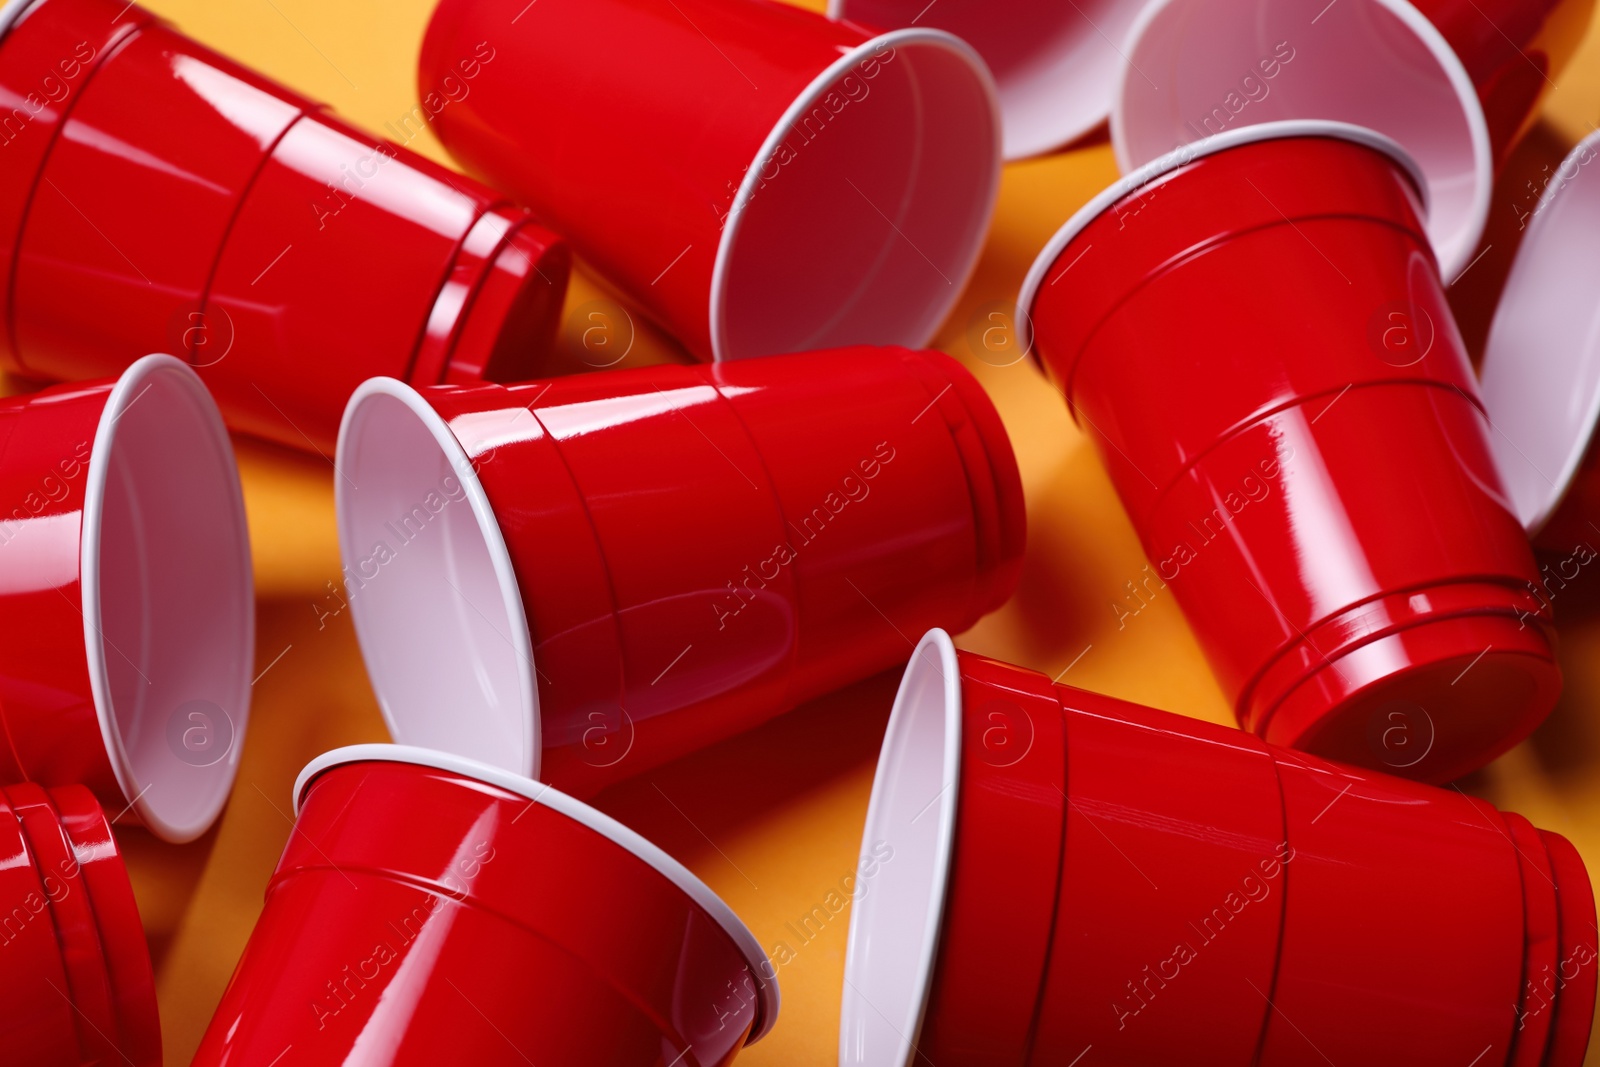 Photo of Red plastic cups for beer pong game on orange background, closeup